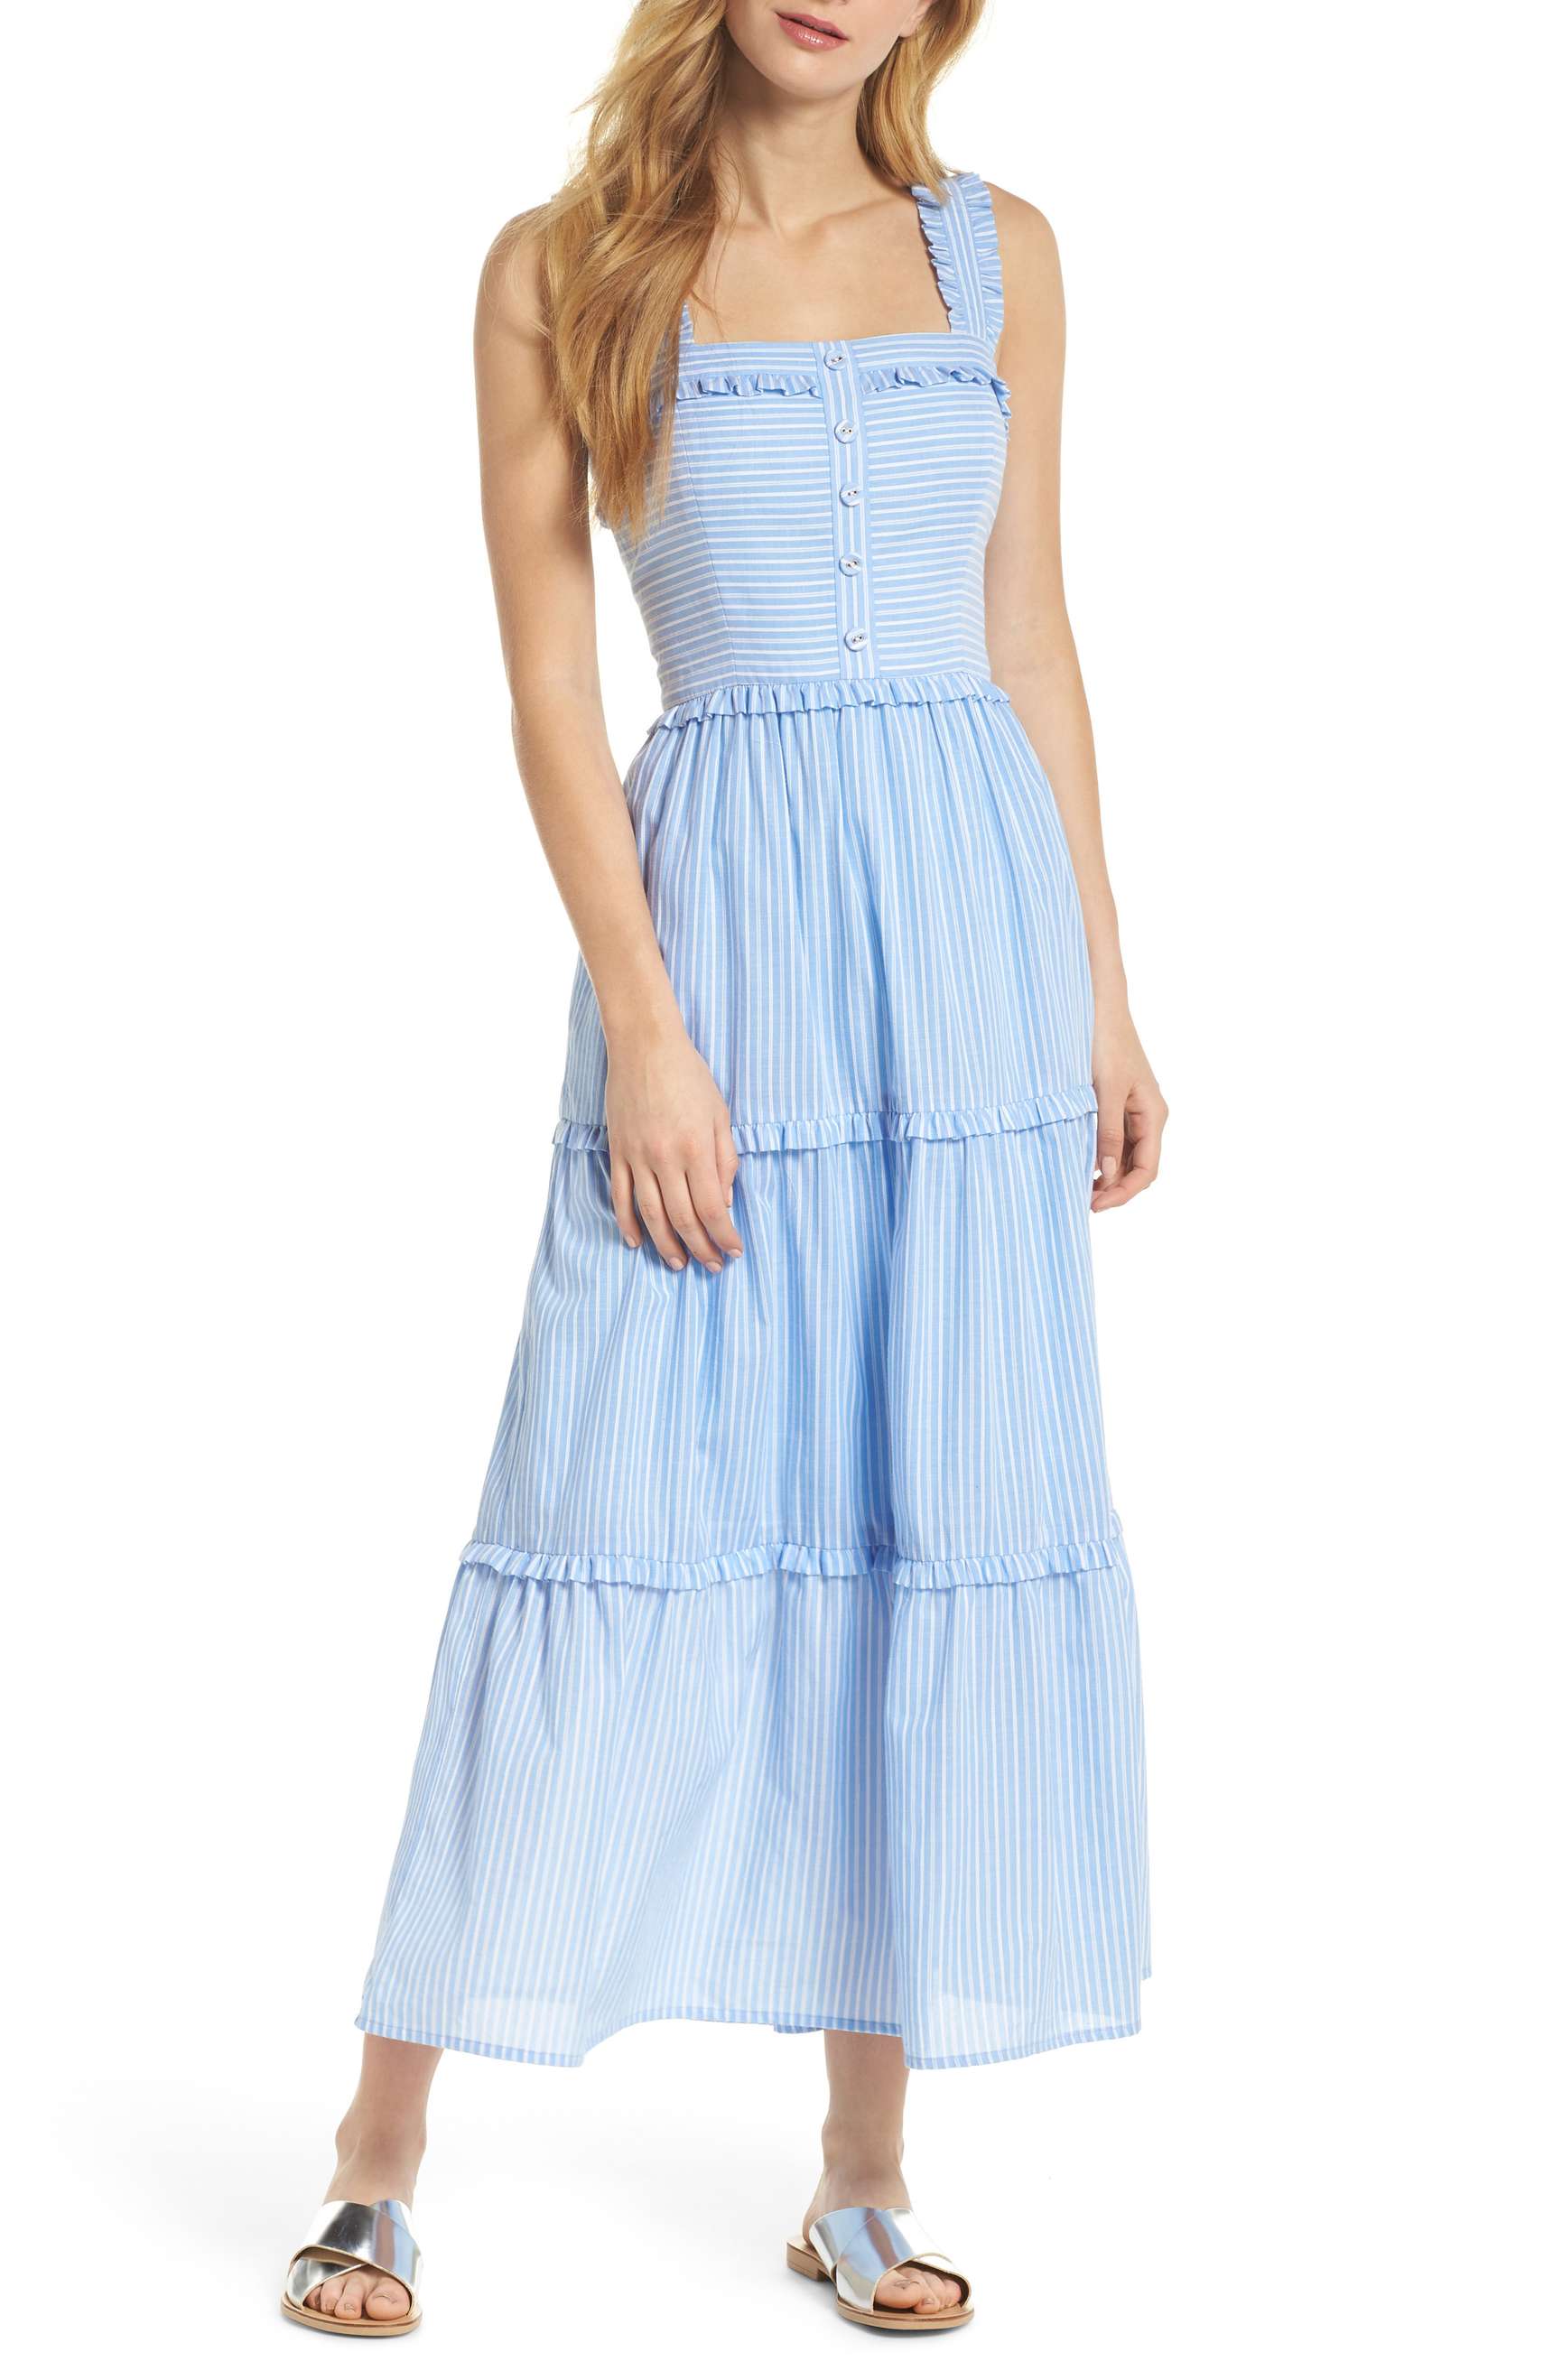 To me, stripes tend to seem more bold than delicate, but this Gal Meets Glam maxi dress certainly proves me wrong with soft blue stripes, dainty ruffles, and a flattering tiered skirt.  